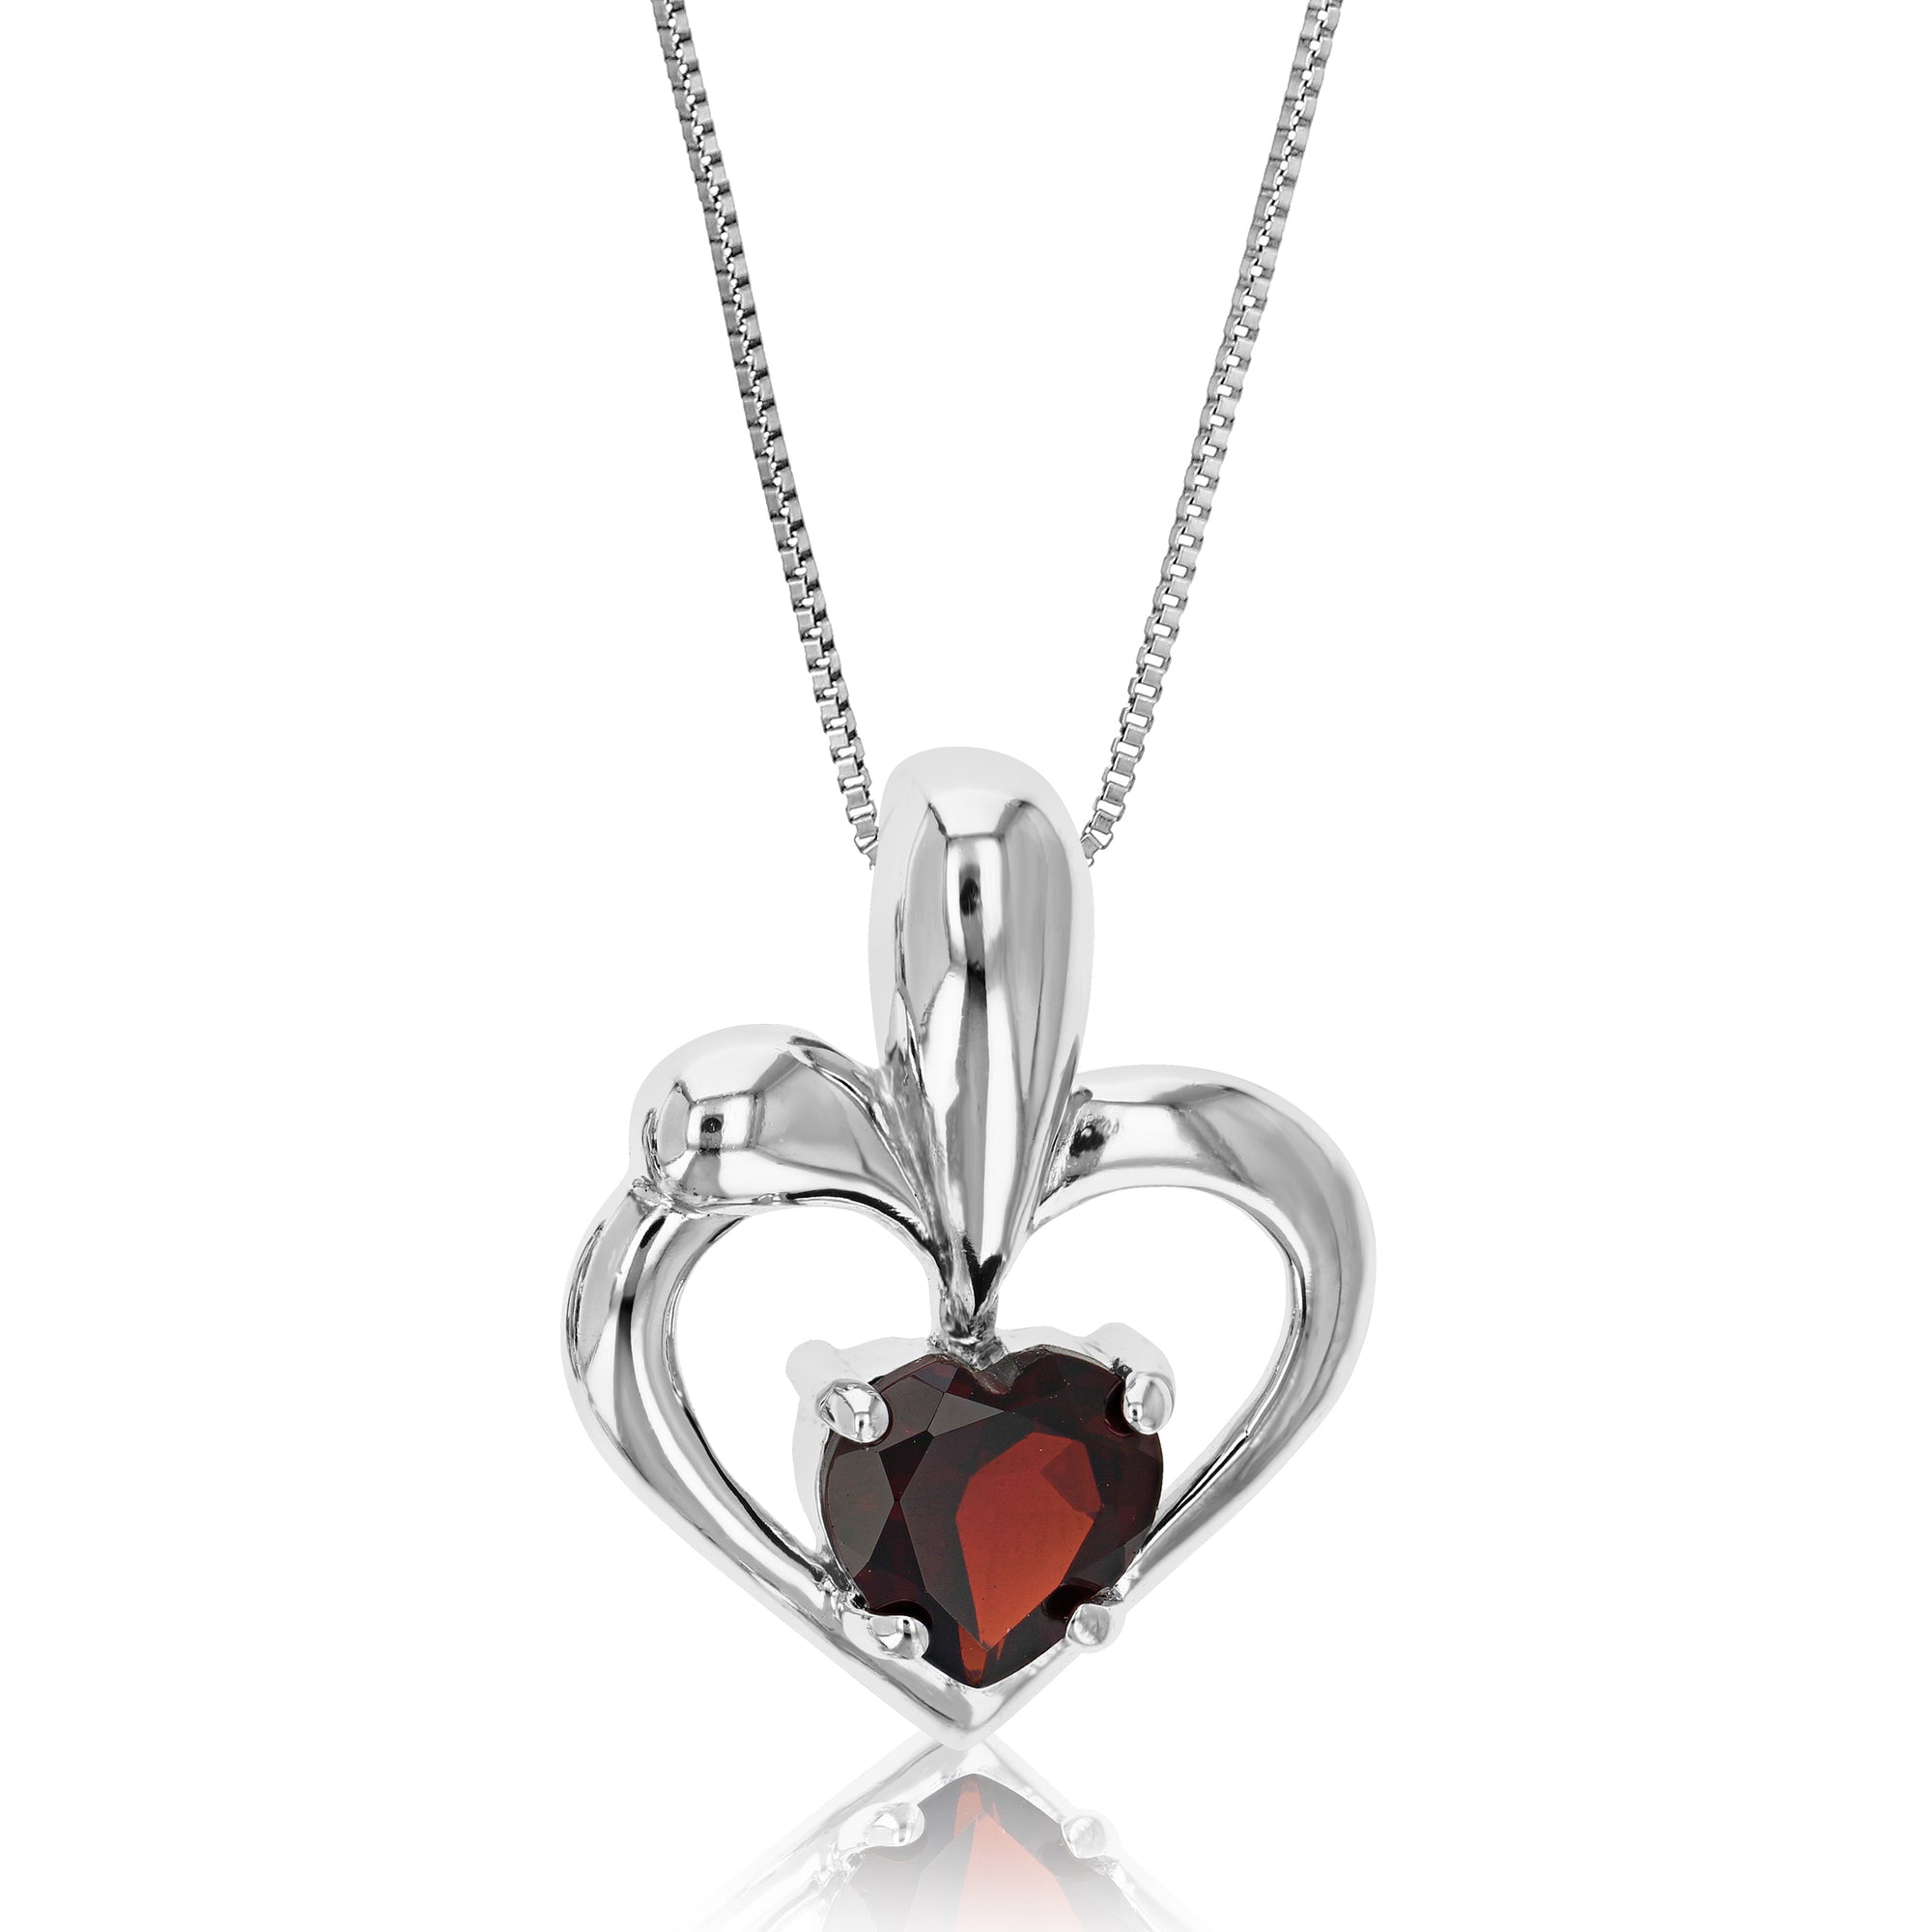 0.90 cttw Pendant Necklace, Garnet Heart Pendant Necklace for Women in .925 Sterling Silver with Rhodium, 18 Inch Chain, Prong Setting